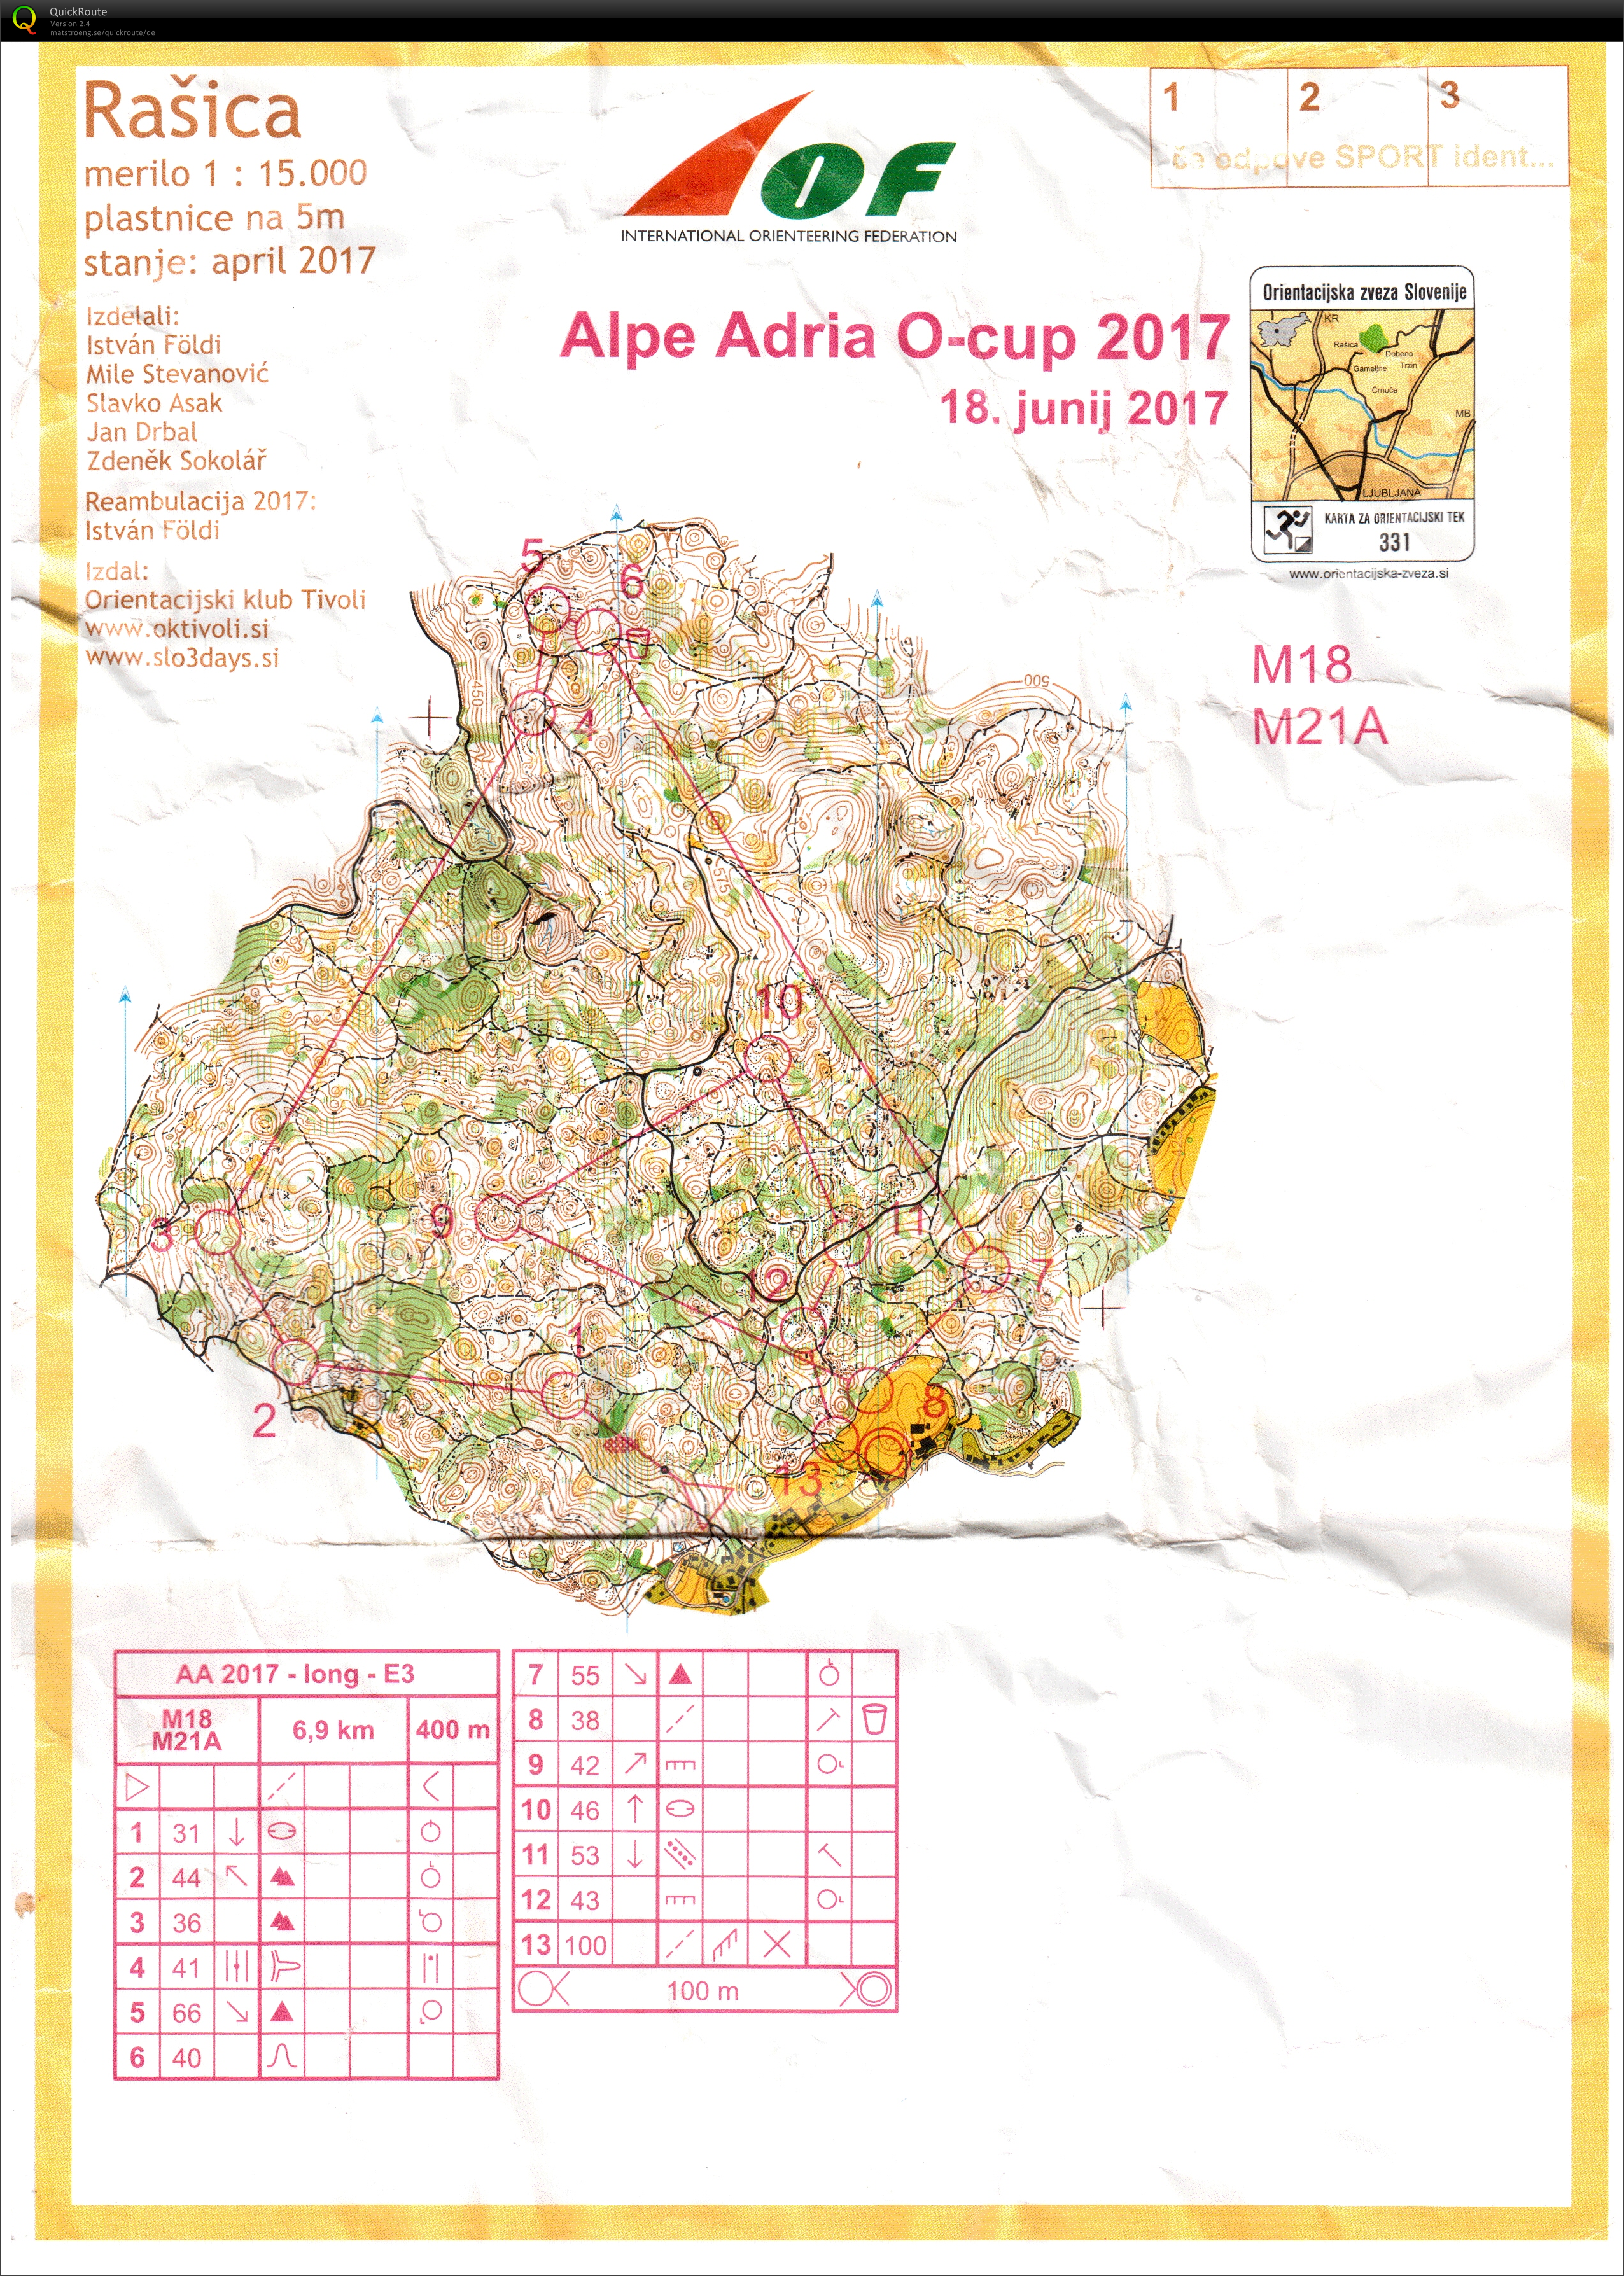 4. Austria Cup and Alpe Adria Cup (18/06/2017)